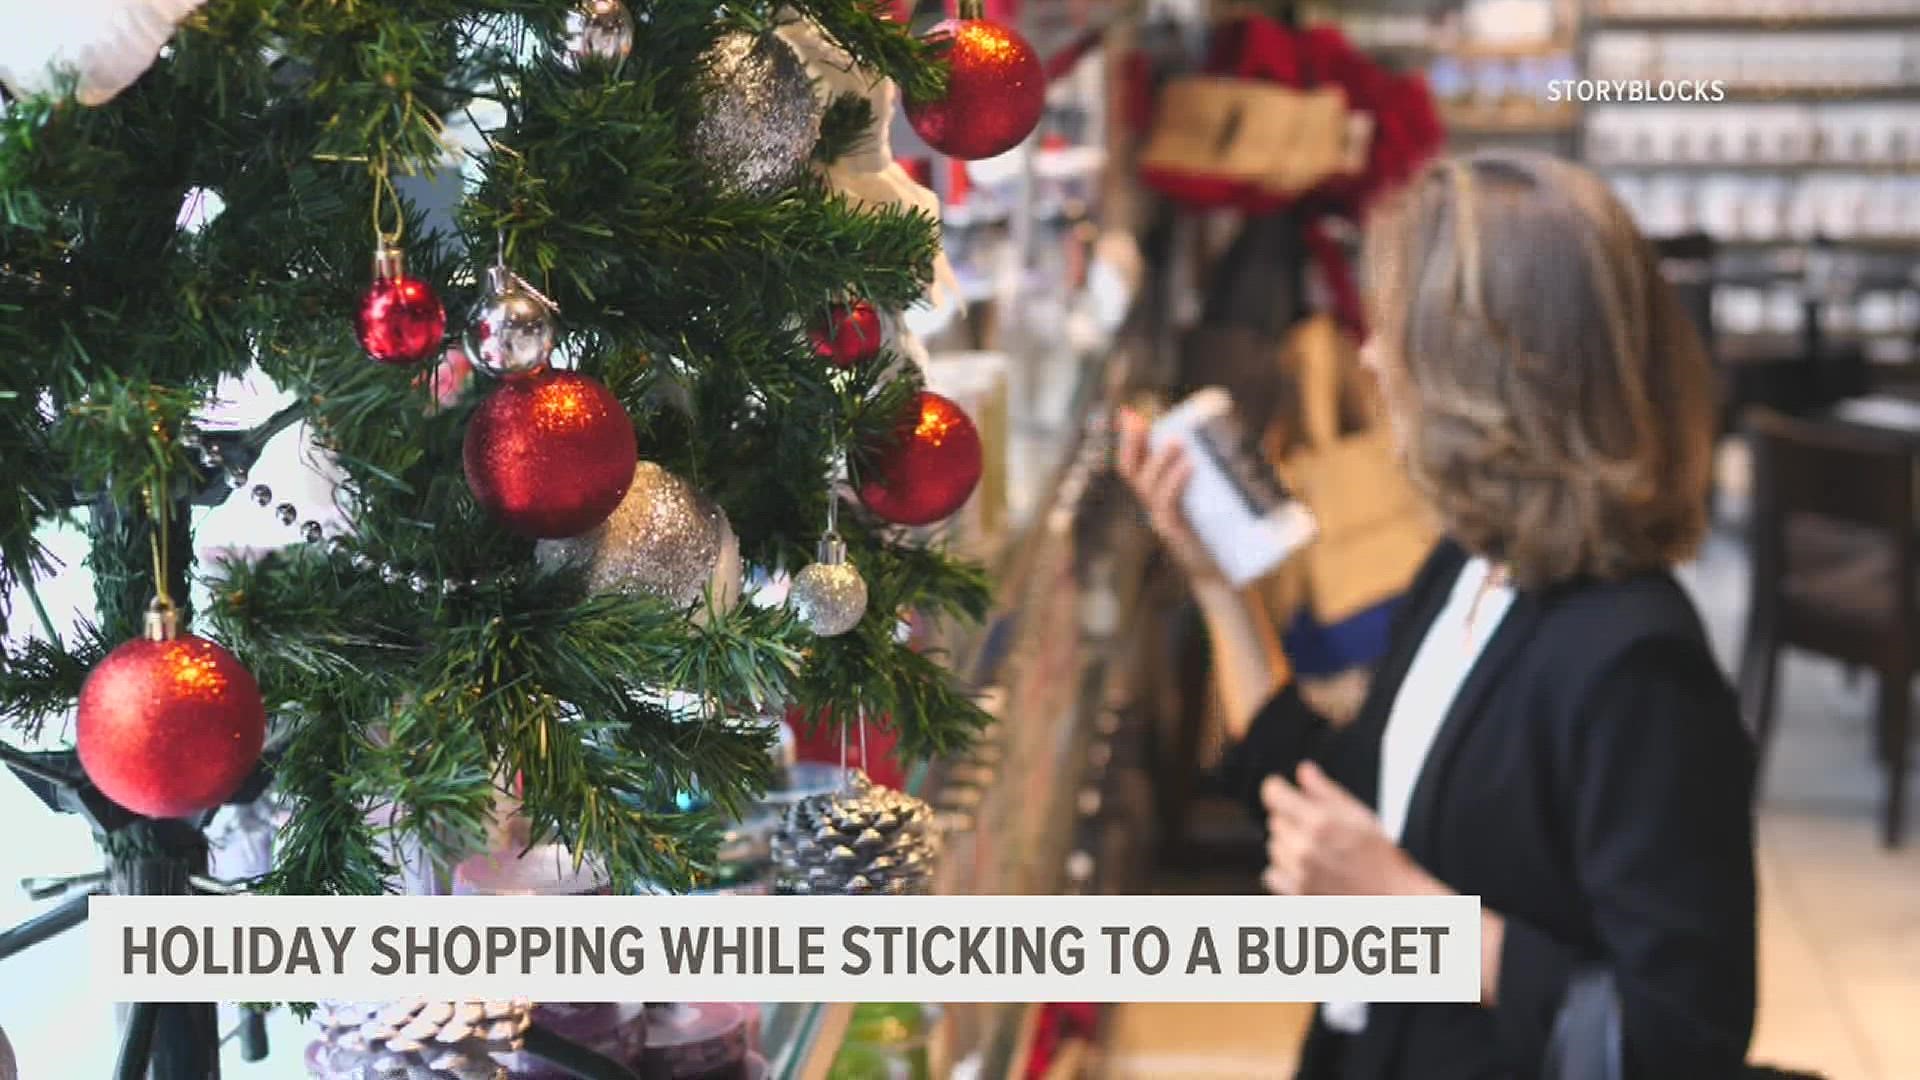 Experts offer holiday shoppers some quick tips on how to best plan out your last minute shopping without going over budget.